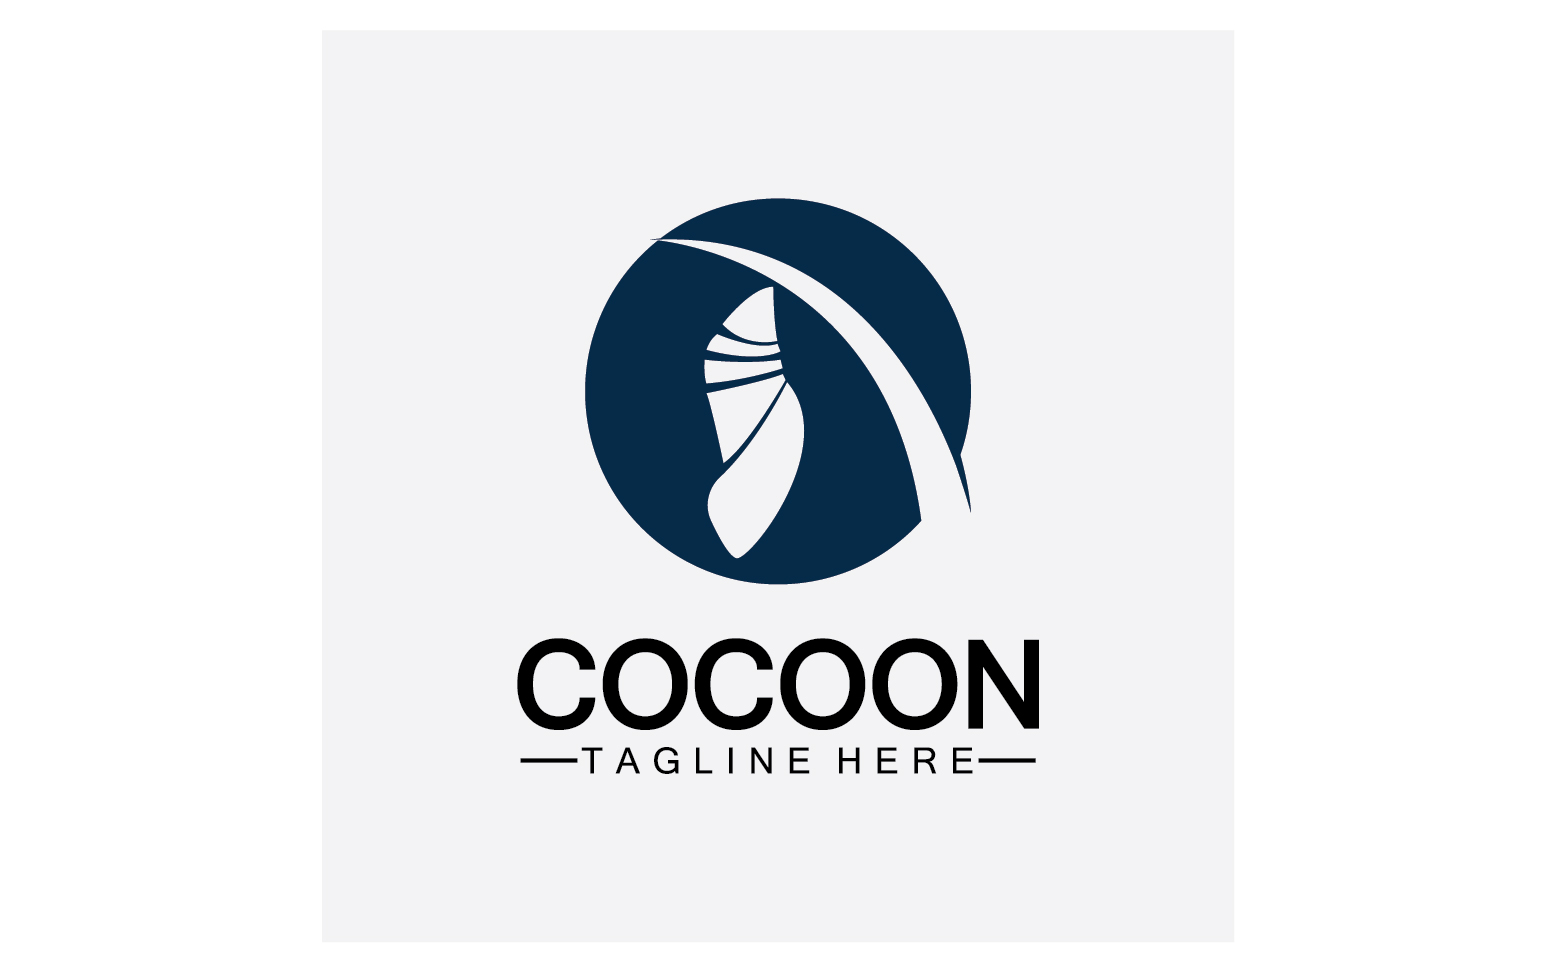 Cocoon butterfly logo icon vector v31